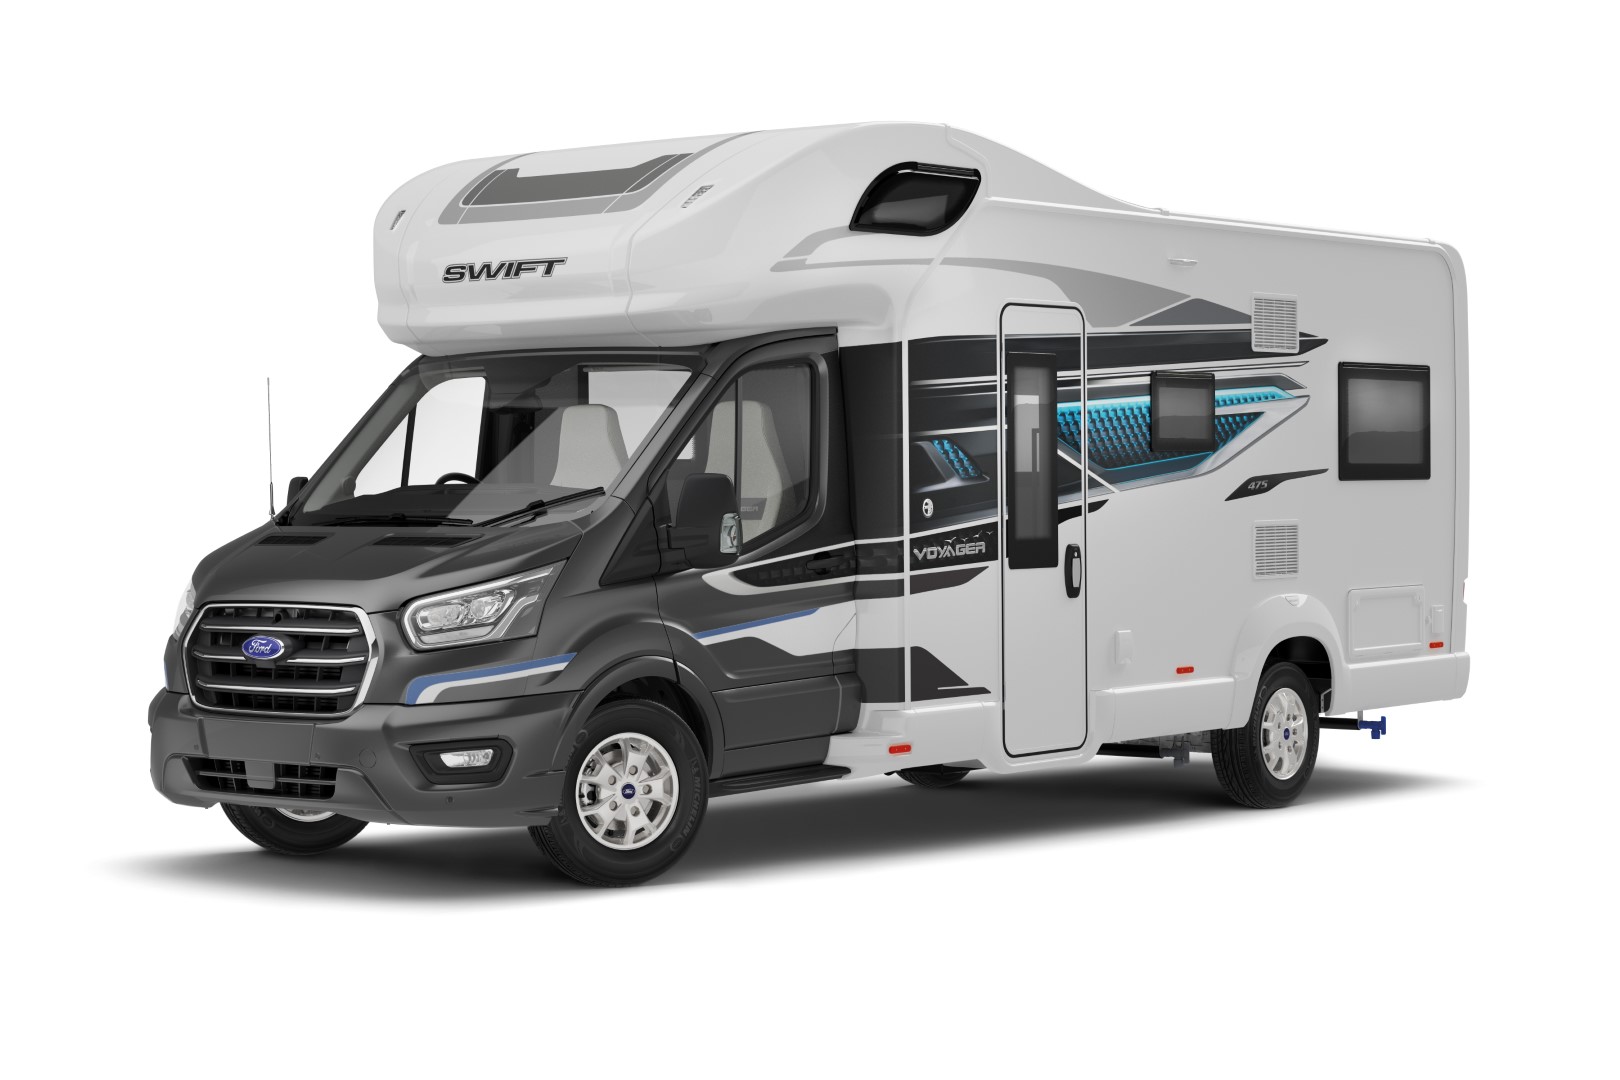 EXT Voyager 475 Front 3Q SWIFT